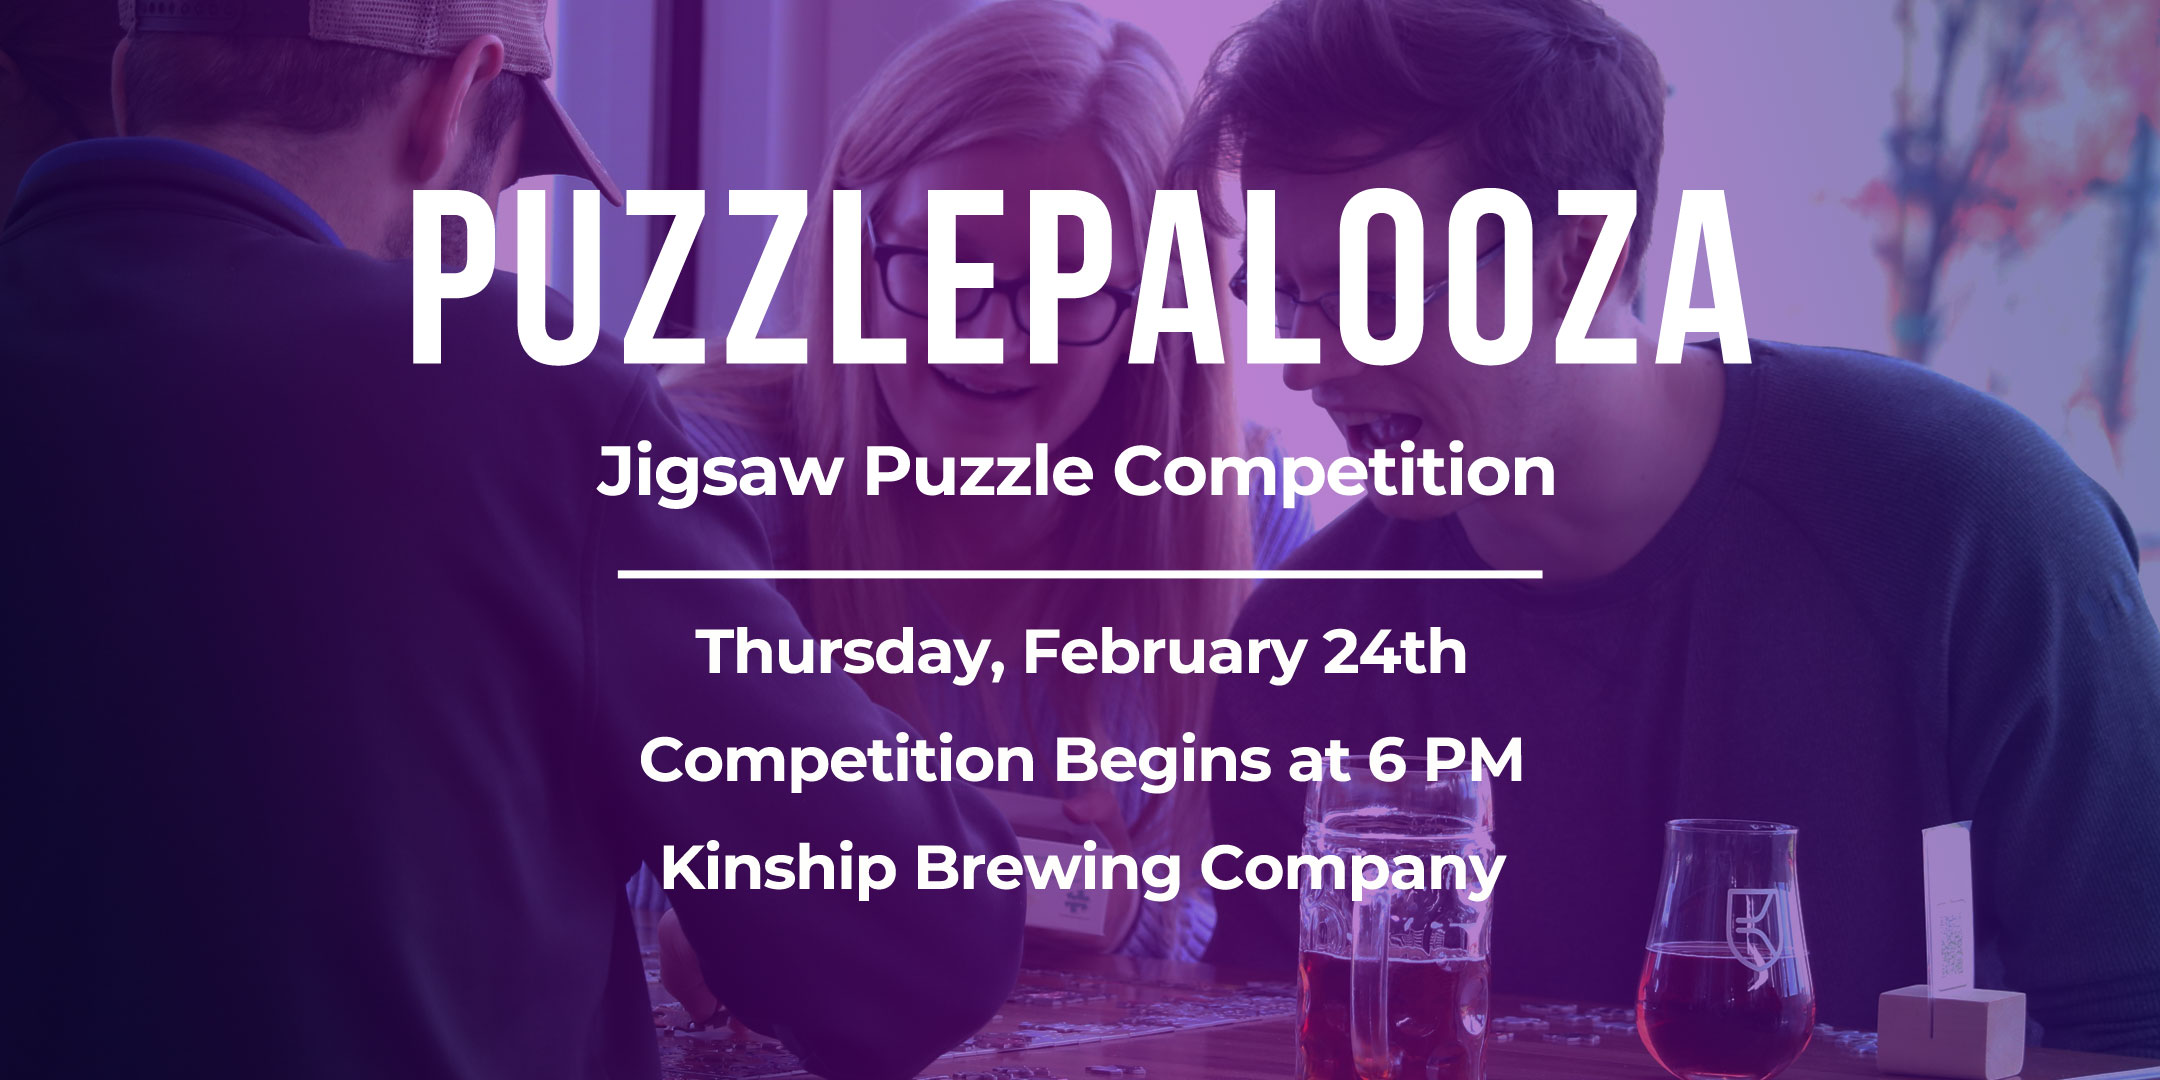 Puzzlepalooza Jigsaw Puzzle Competition with Kinship Brewing Company February 24, 2022 Header Image